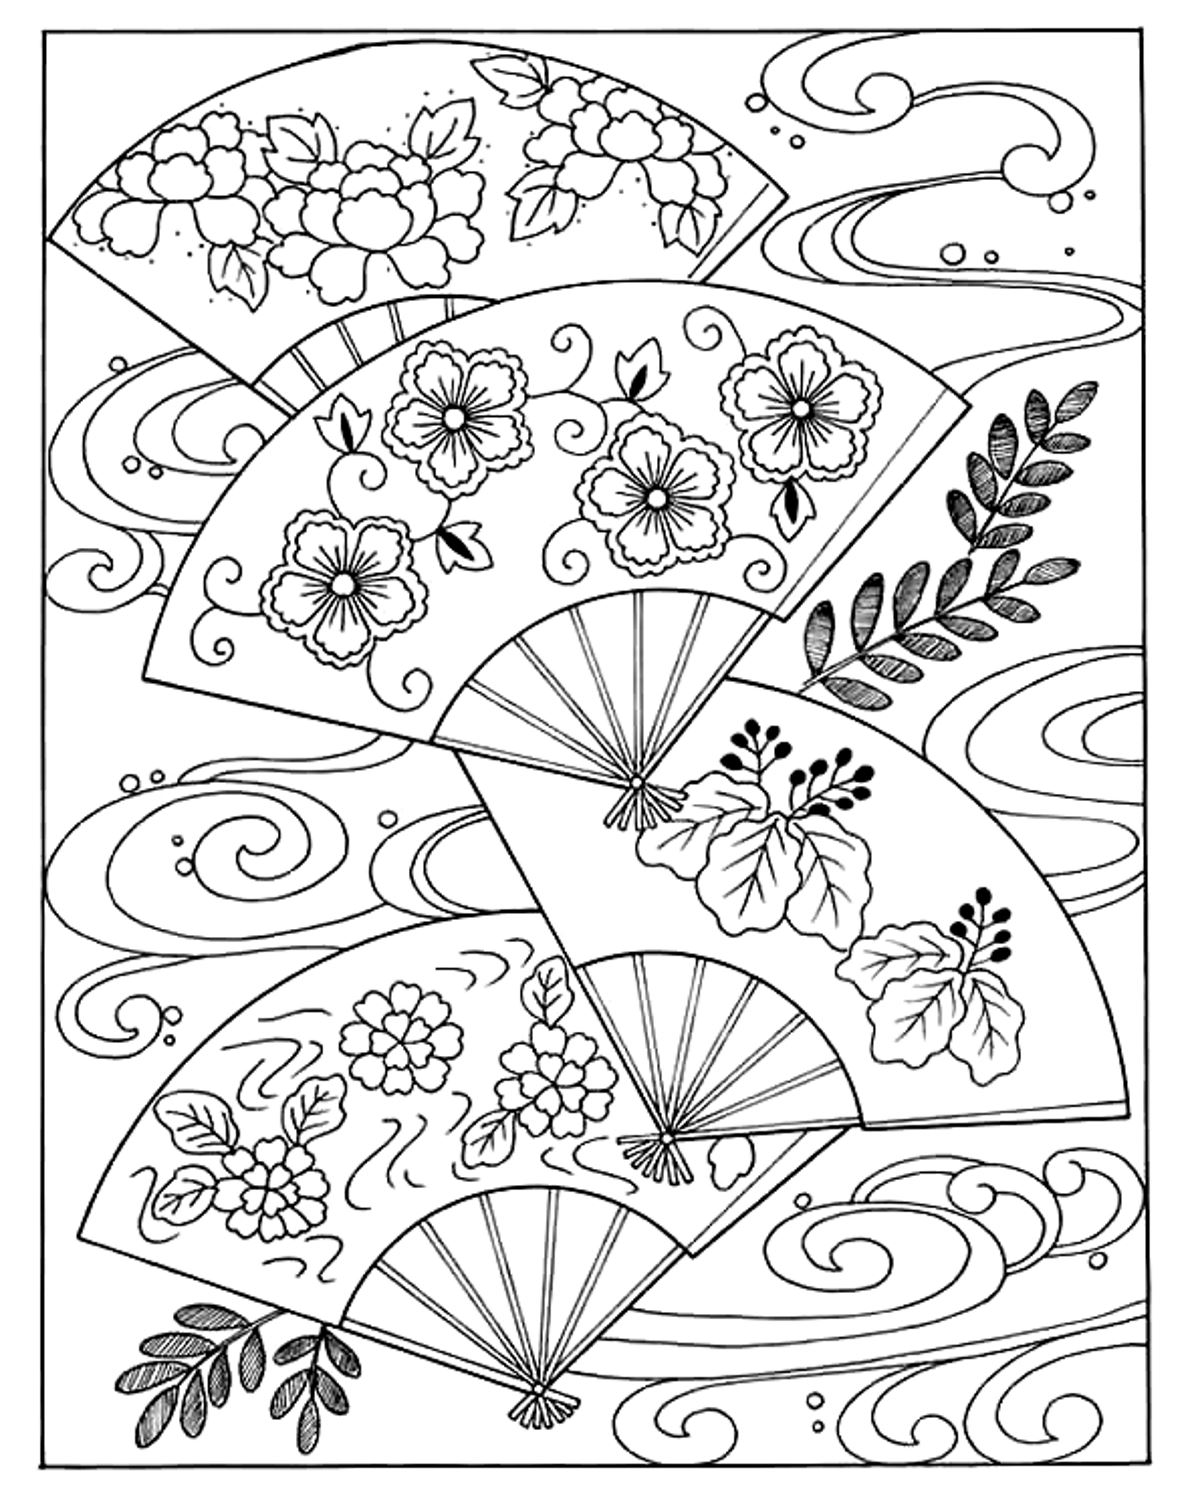 Japanese hand fan Japan Adult Coloring Pages Page 2